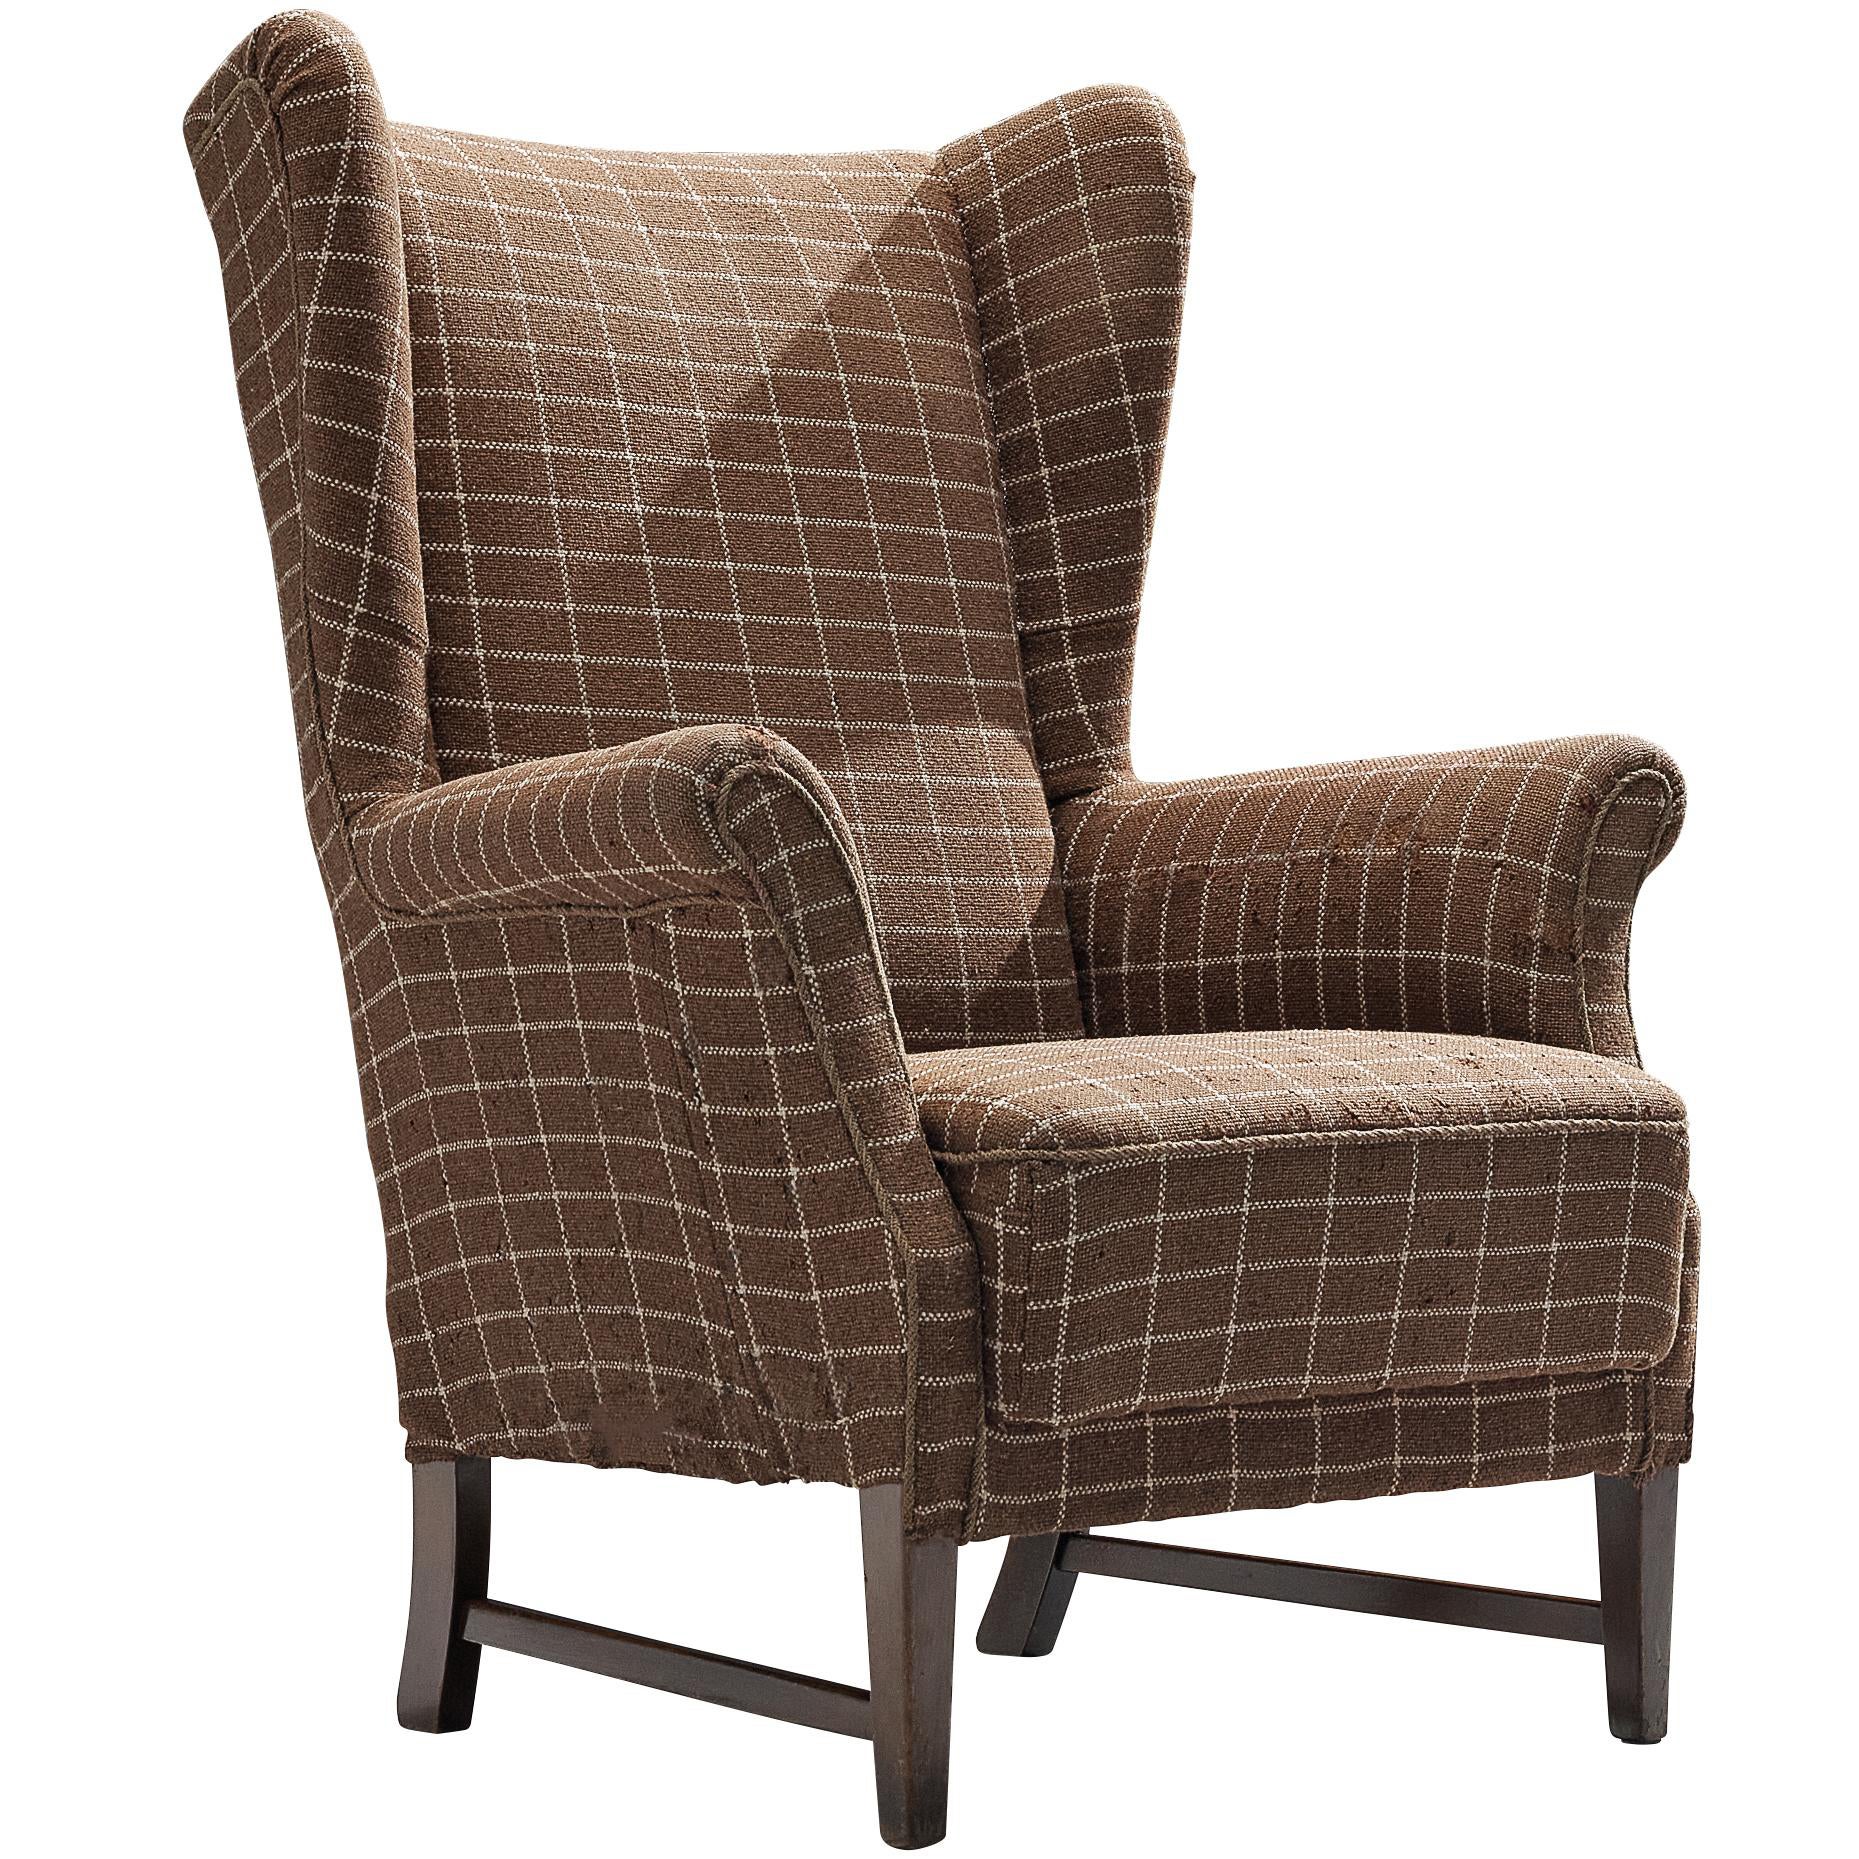 Danish Wingback Chair in Brown Checkered Upholstery